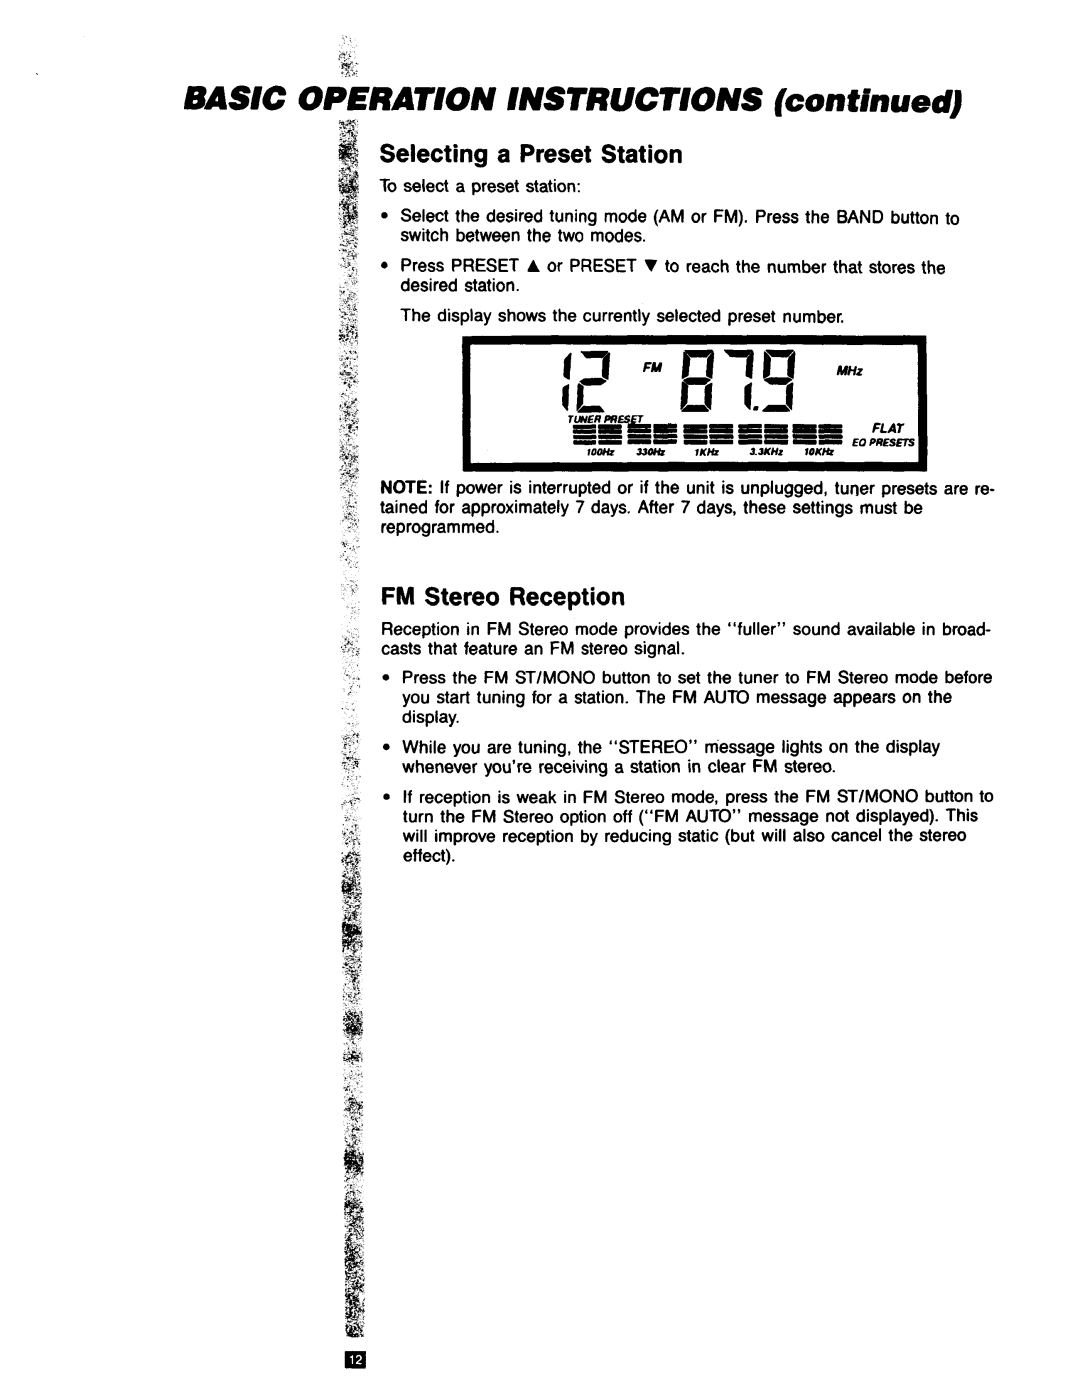 RCA RP-9753 manual BASIC OPERATION INSTRUCTIONS continued, Selecting a Preset Station, j.‘* FM Stereo Reception 